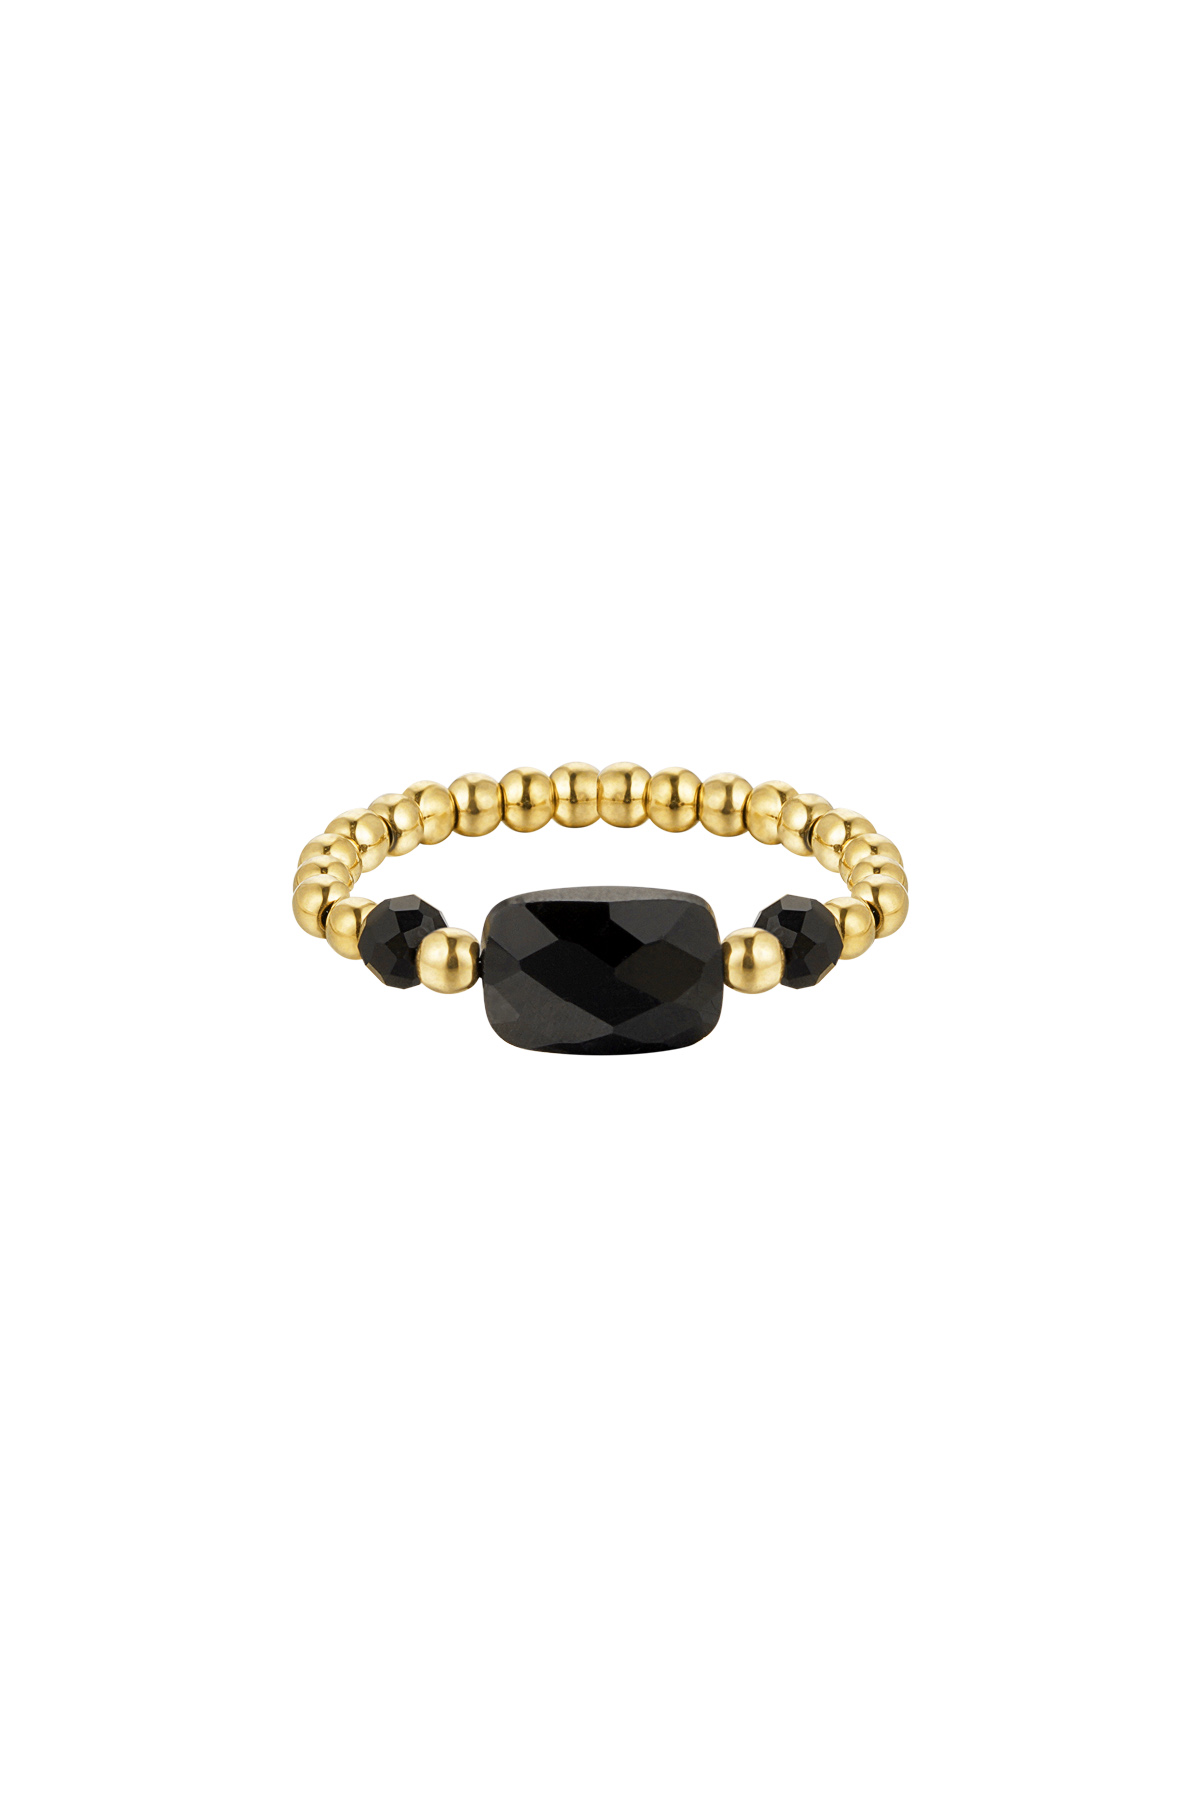 Elastic ring three beads - black - Natural stone collection Black & Gold One size h5 